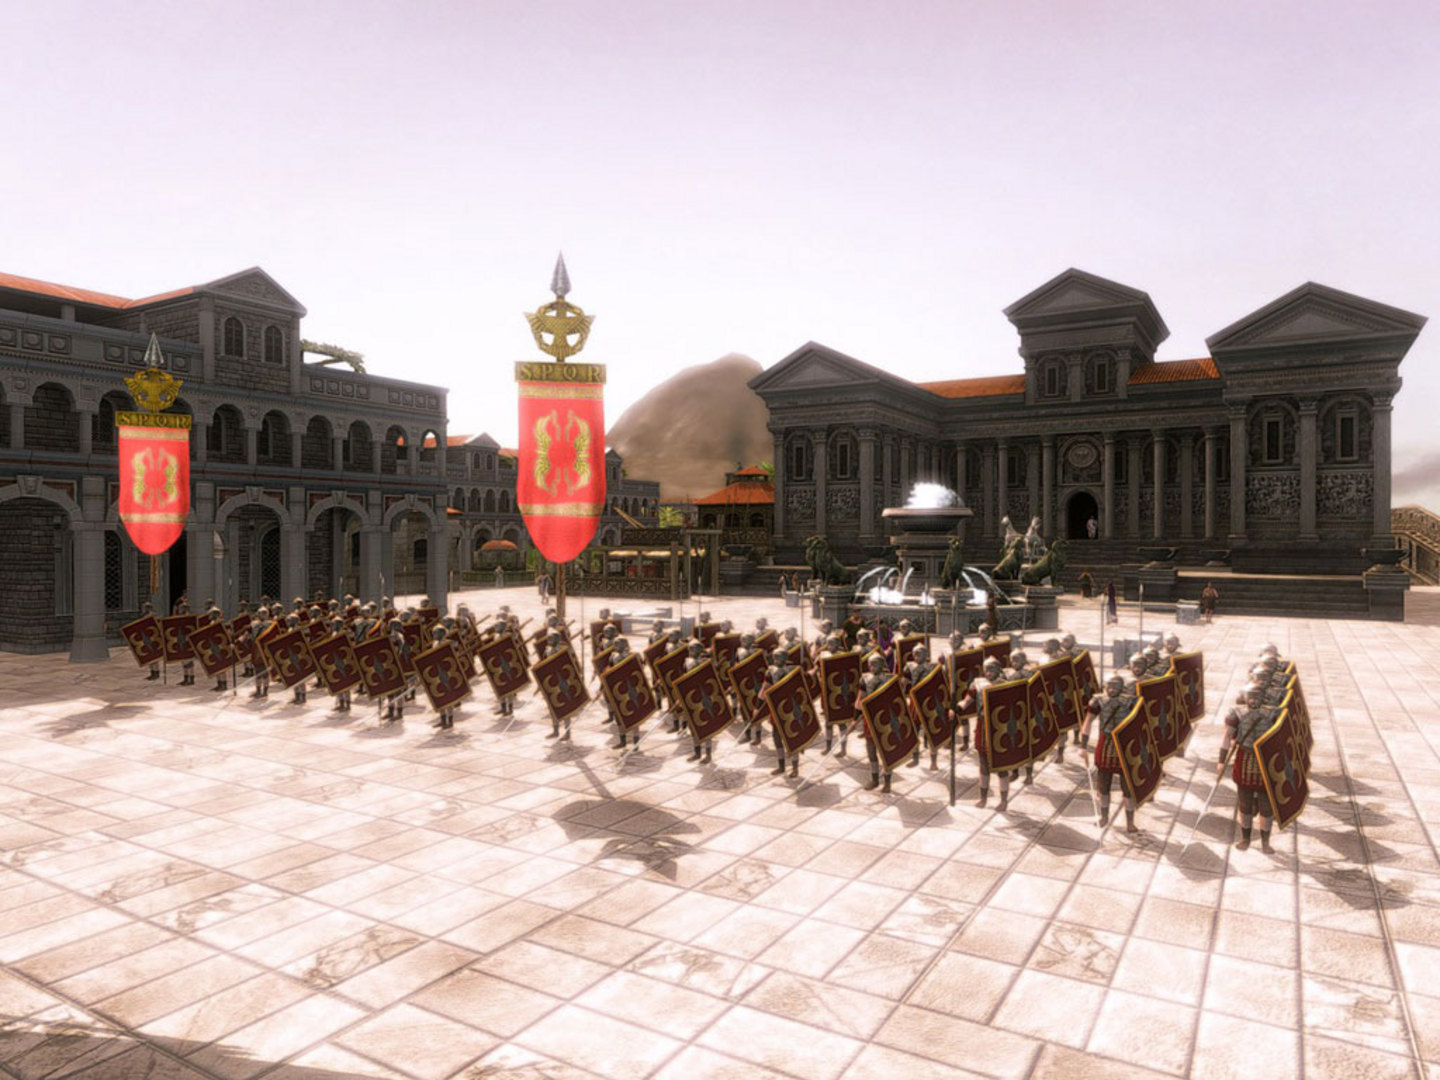 grand ages rome reign of augustus download full version free